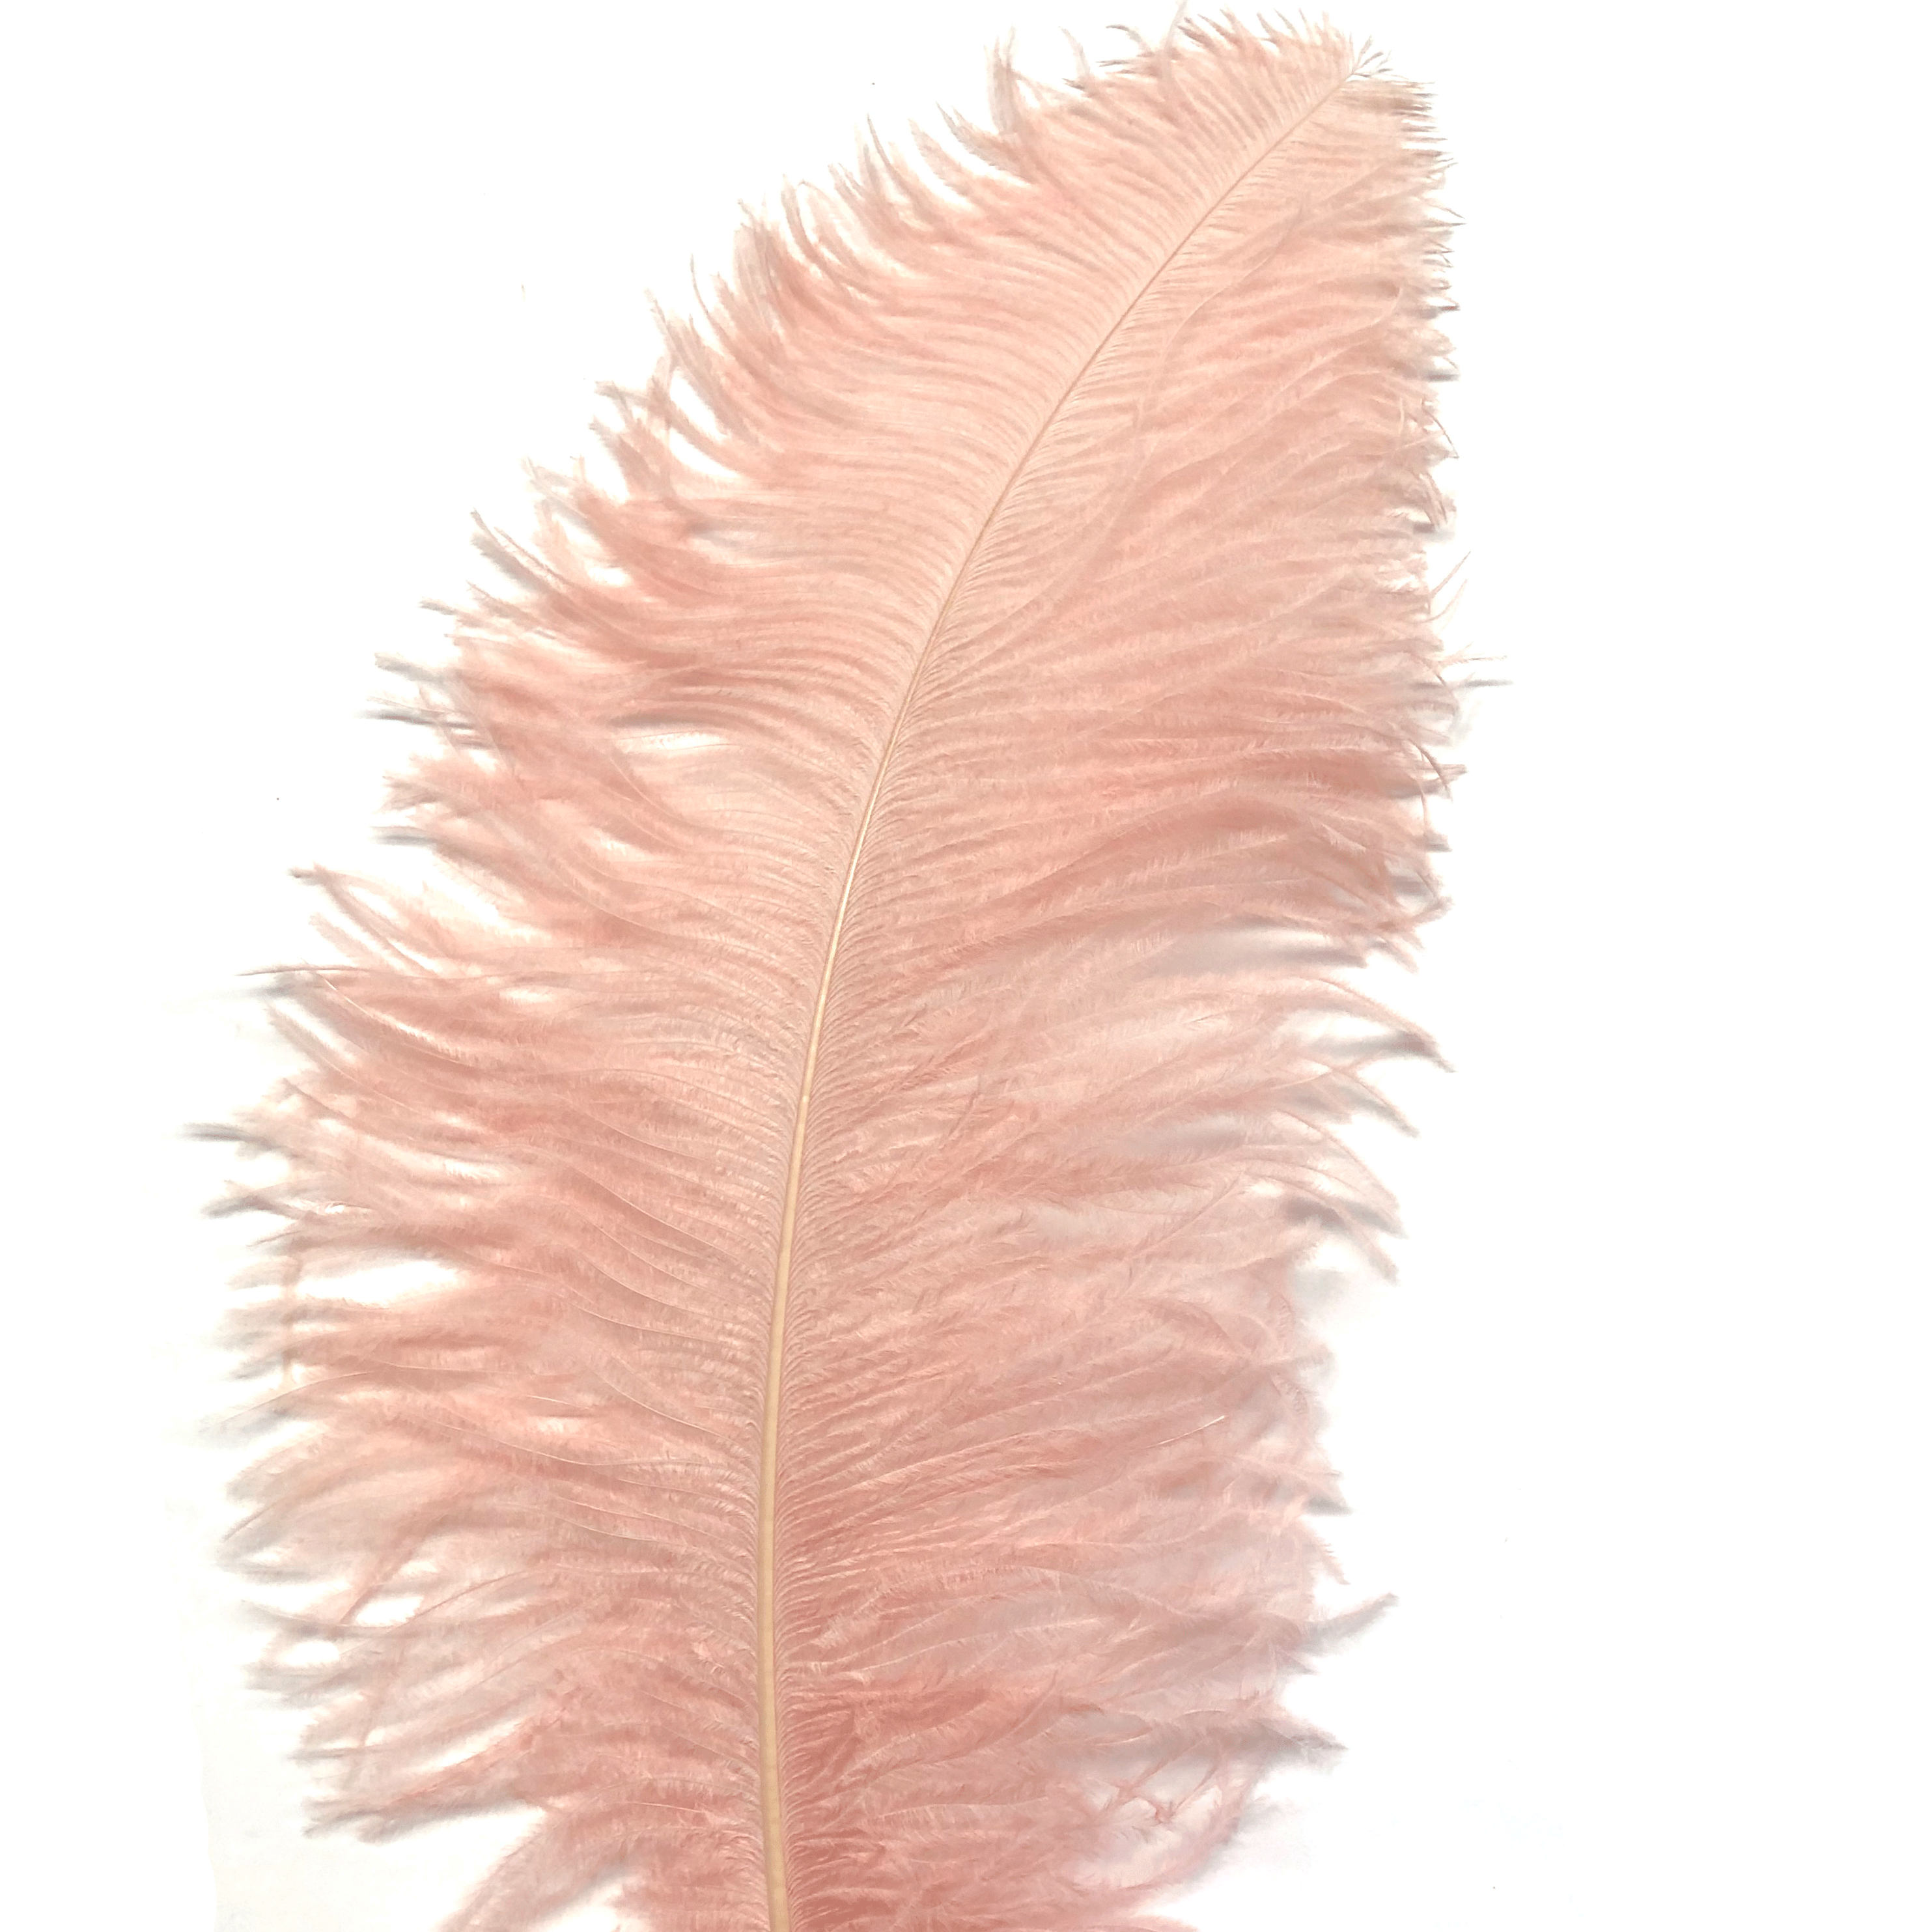 Ostrich Wing Feather Plumes 60-65cm (24-26") - Blush Pink